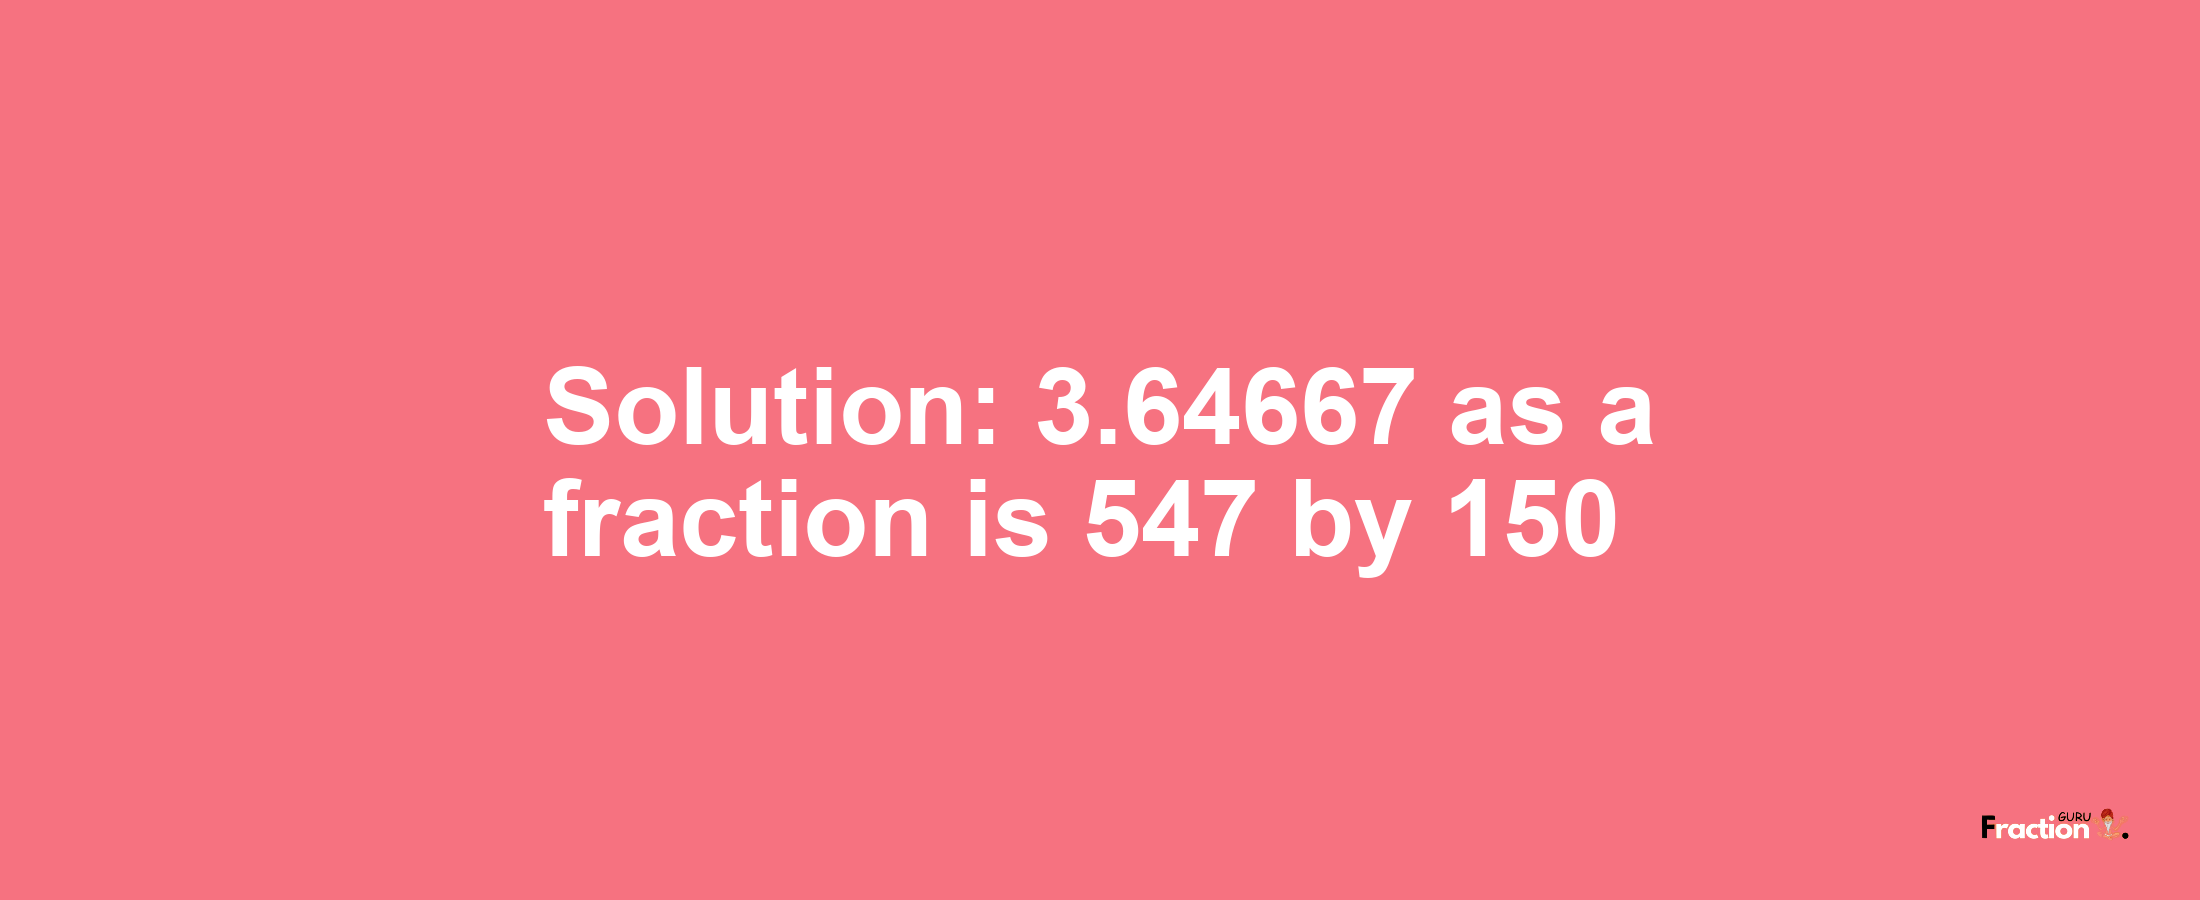 Solution:3.64667 as a fraction is 547/150